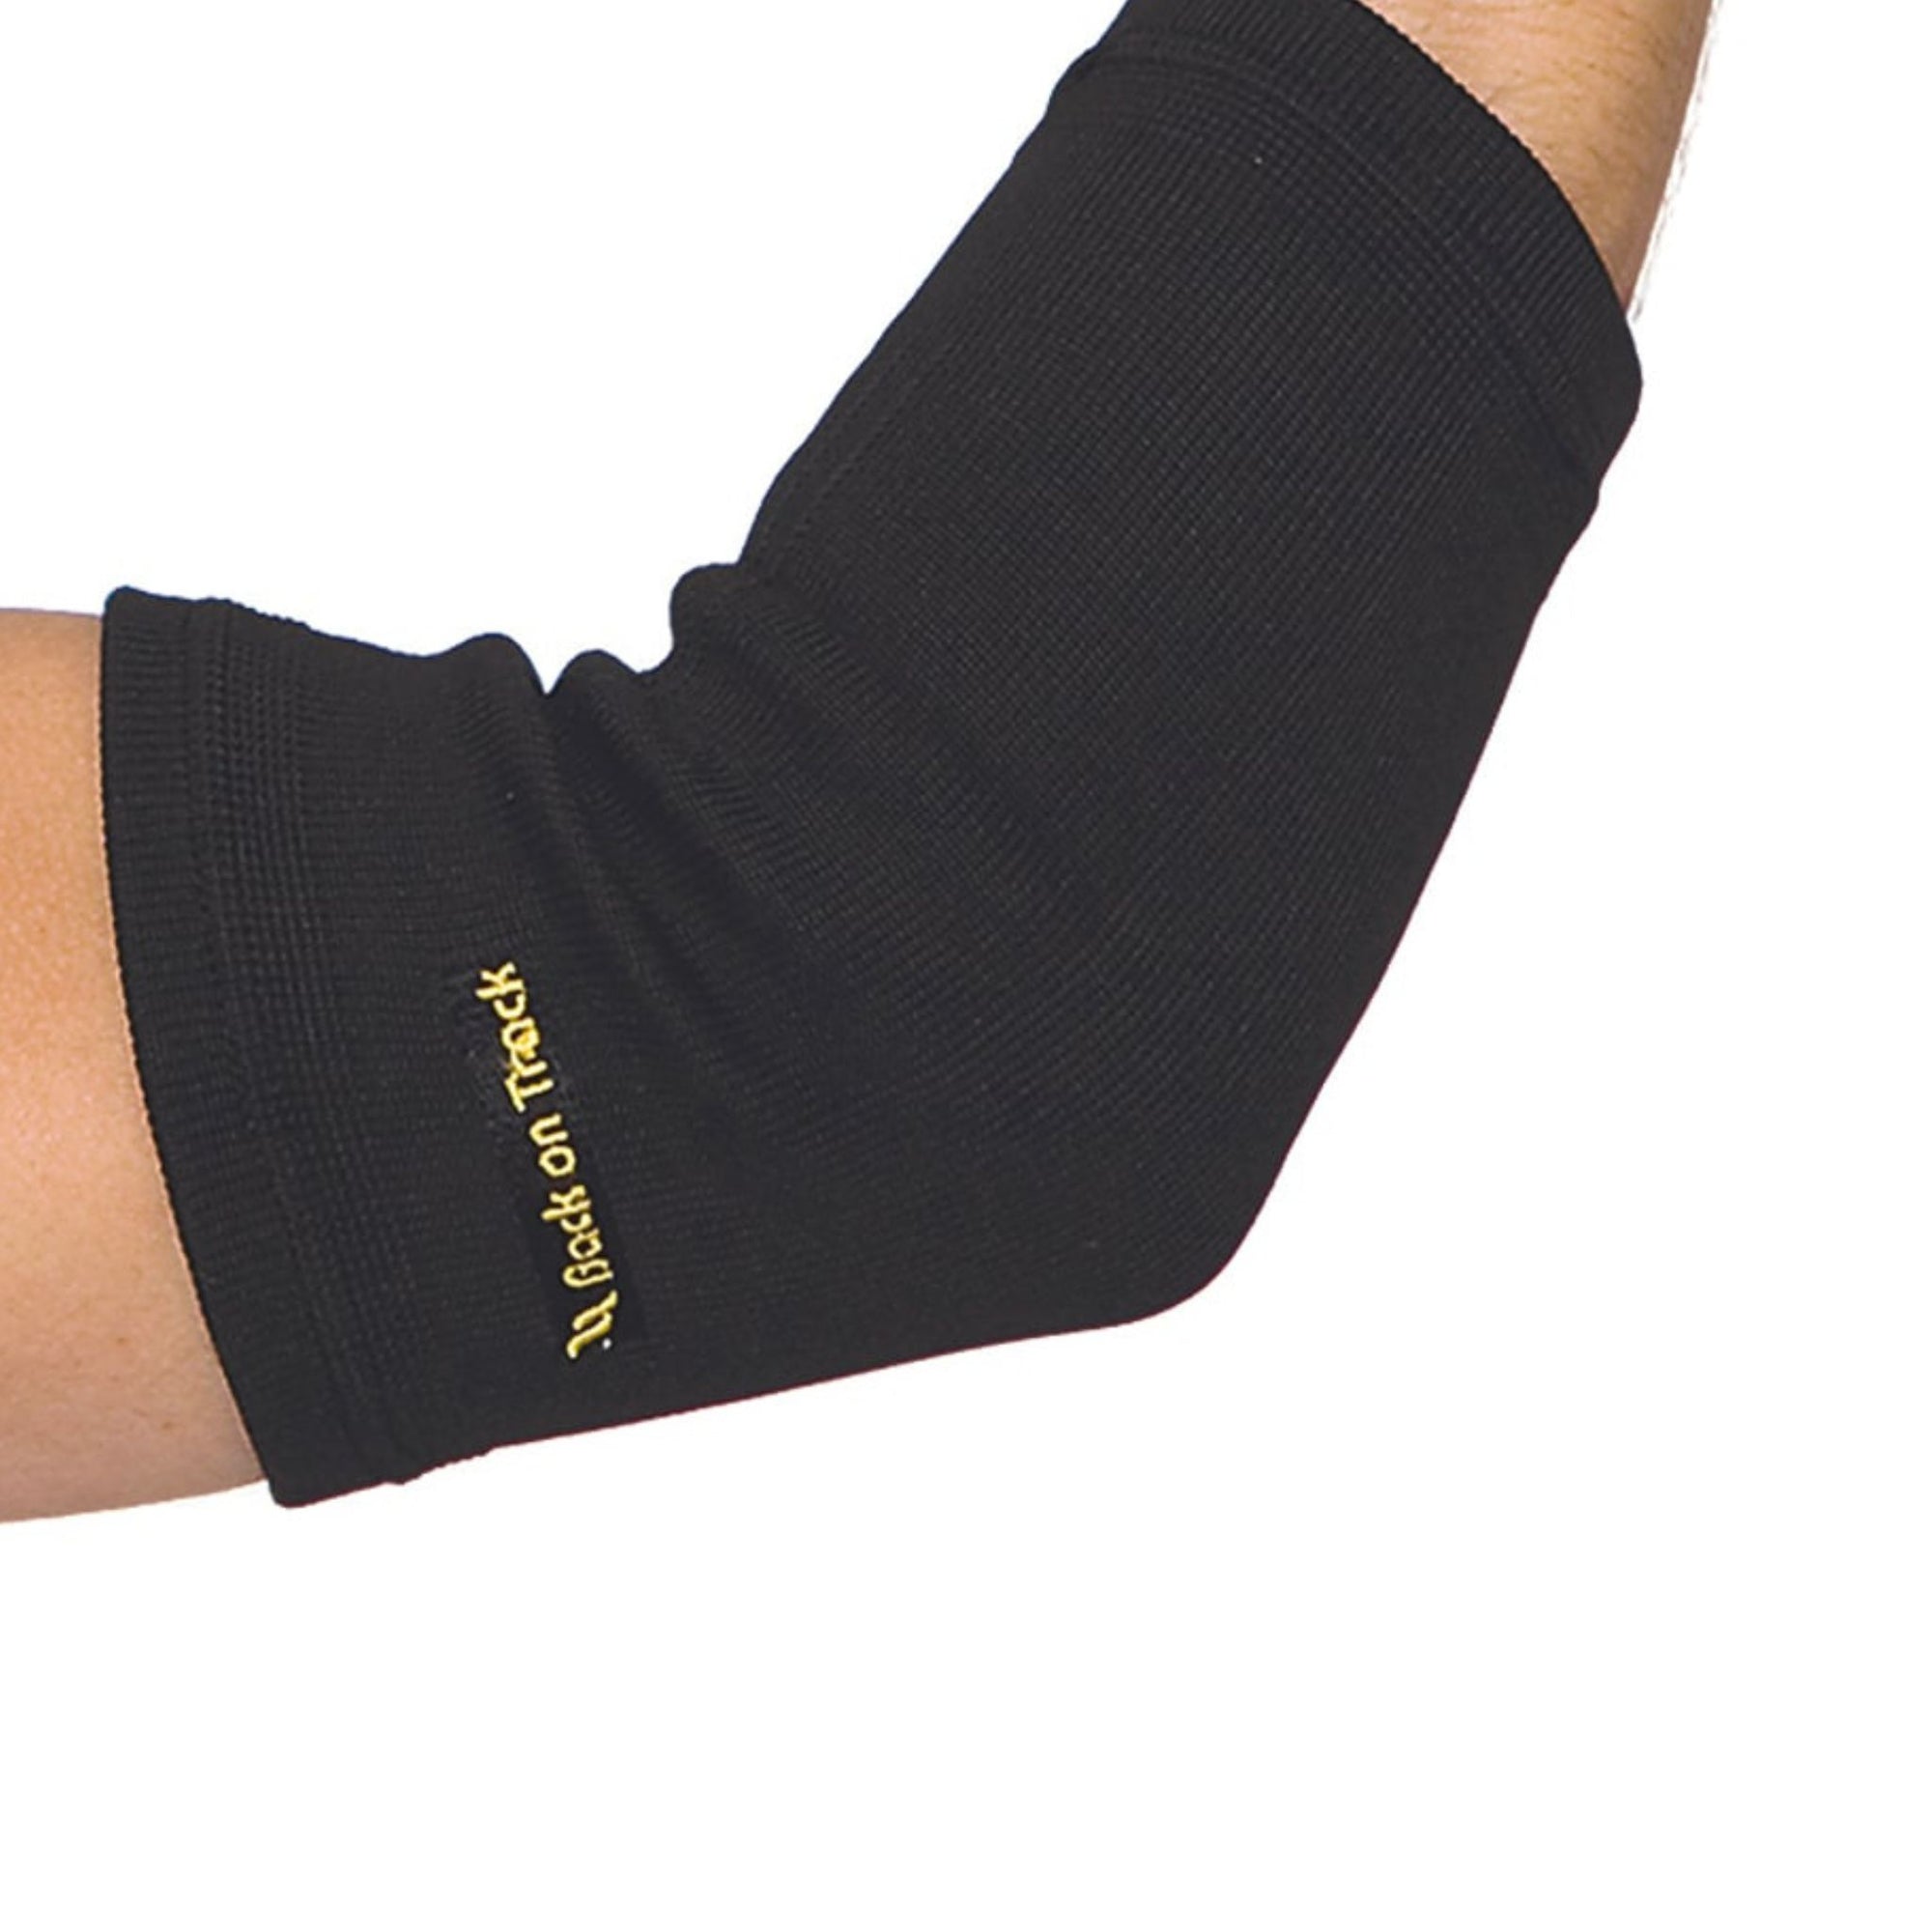 black slip on elbow brace with gold embroidered logo on the side. 